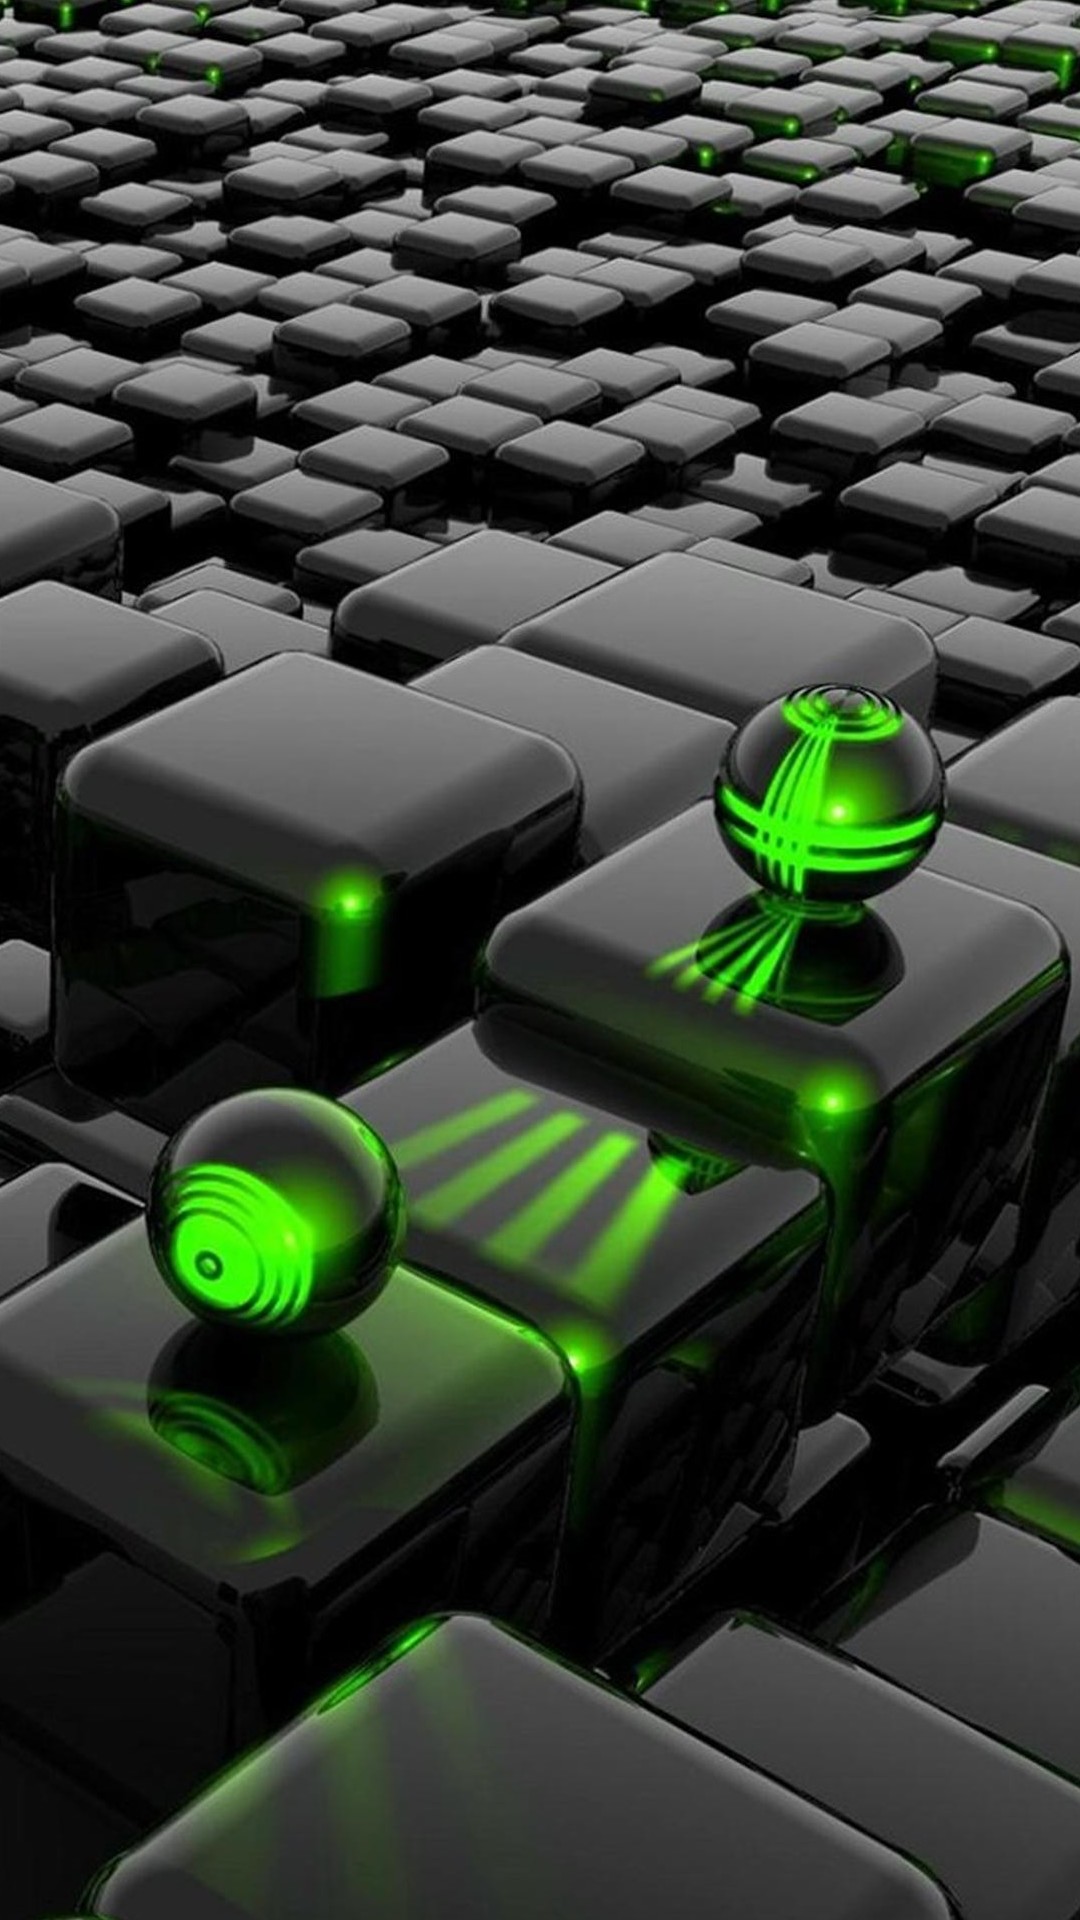 3D Cubes And 3D Green Laser Android wallpaper